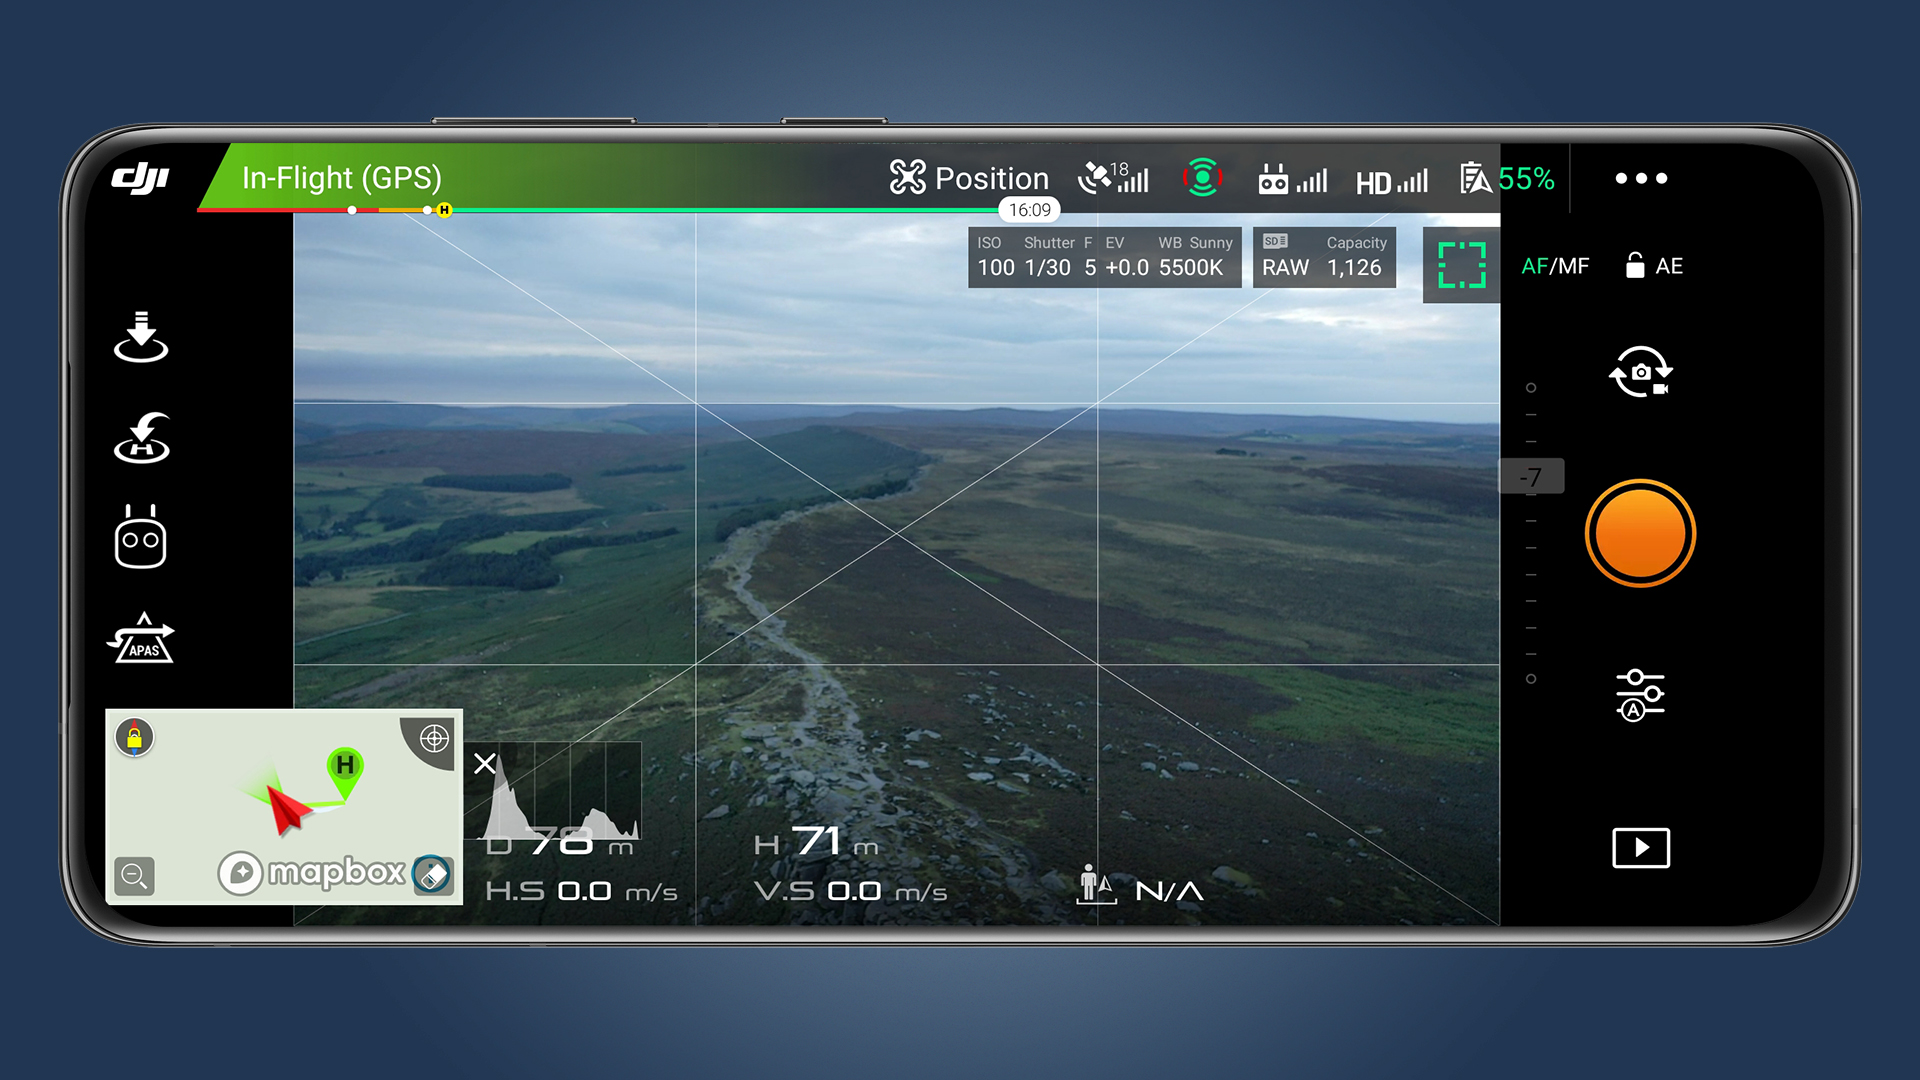 An Android phone showing the DJI app